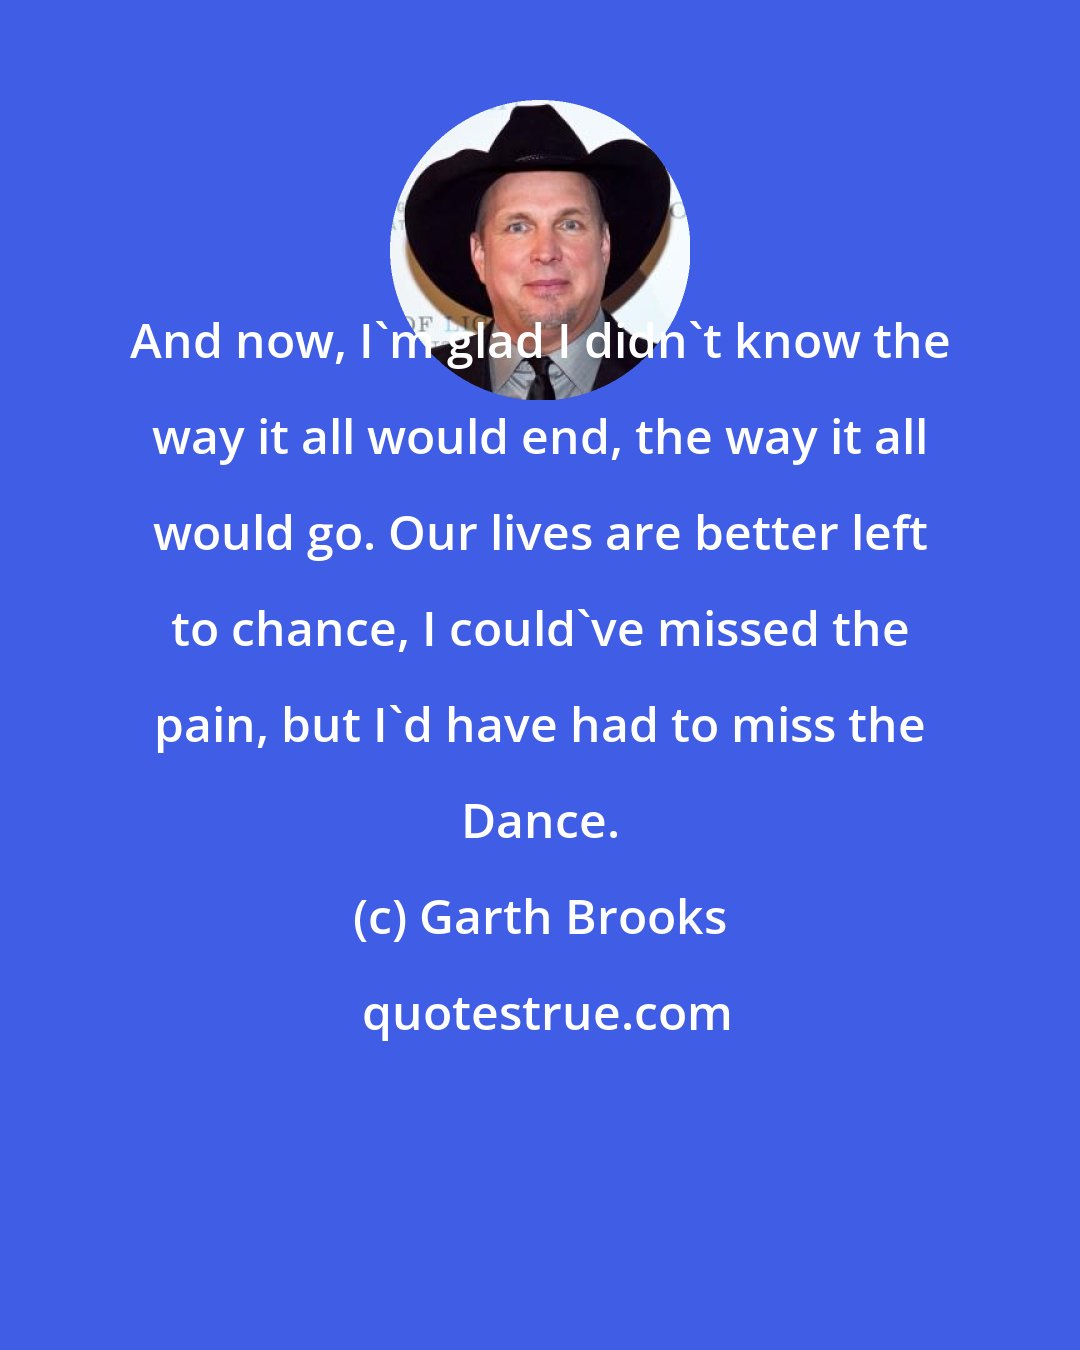 Garth Brooks: And now, I'm glad I didn't know the way it all would end, the way it all would go. Our lives are better left to chance, I could've missed the pain, but I'd have had to miss the Dance.